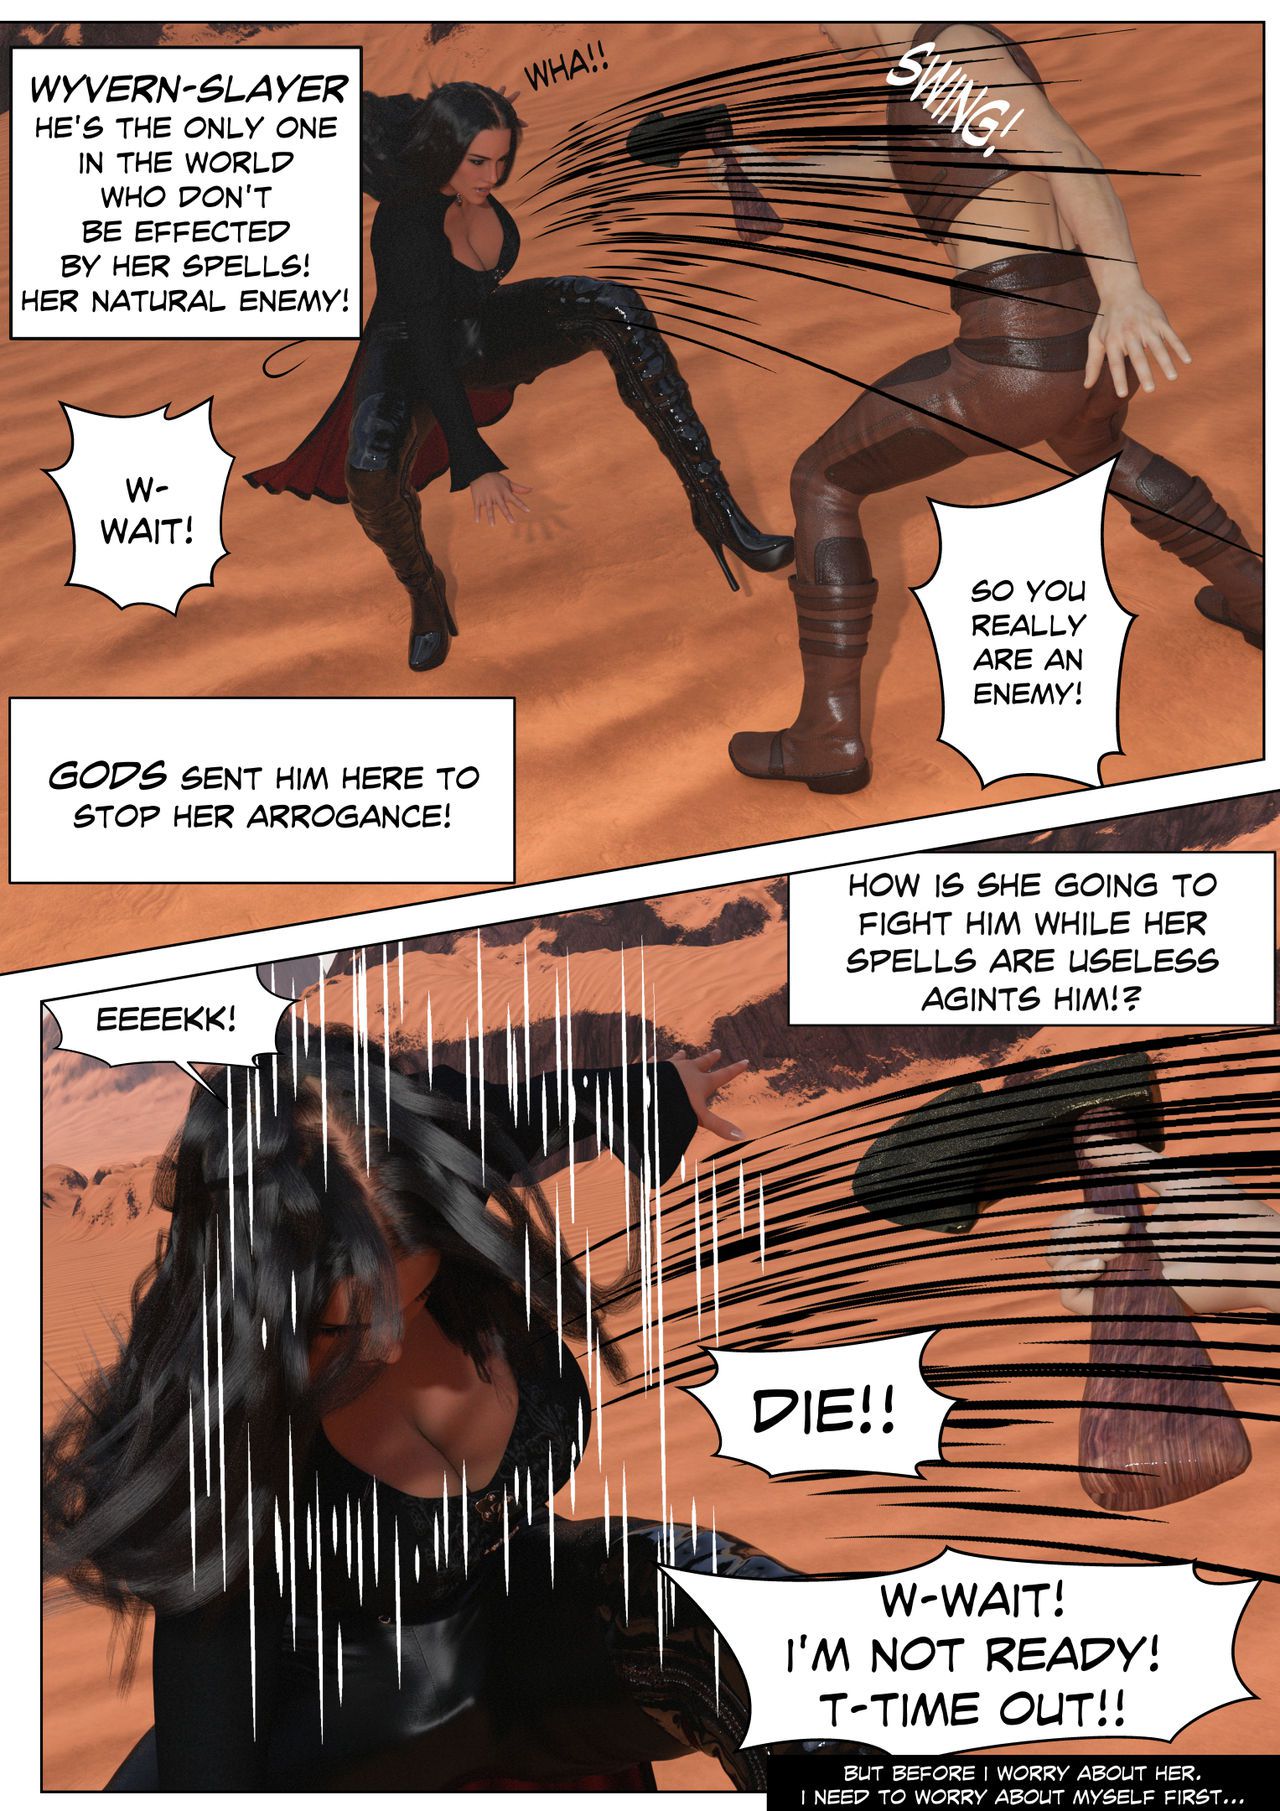 Rise of Goddess Comic : VS The Strongest Warrior by ThuwaGTS 13